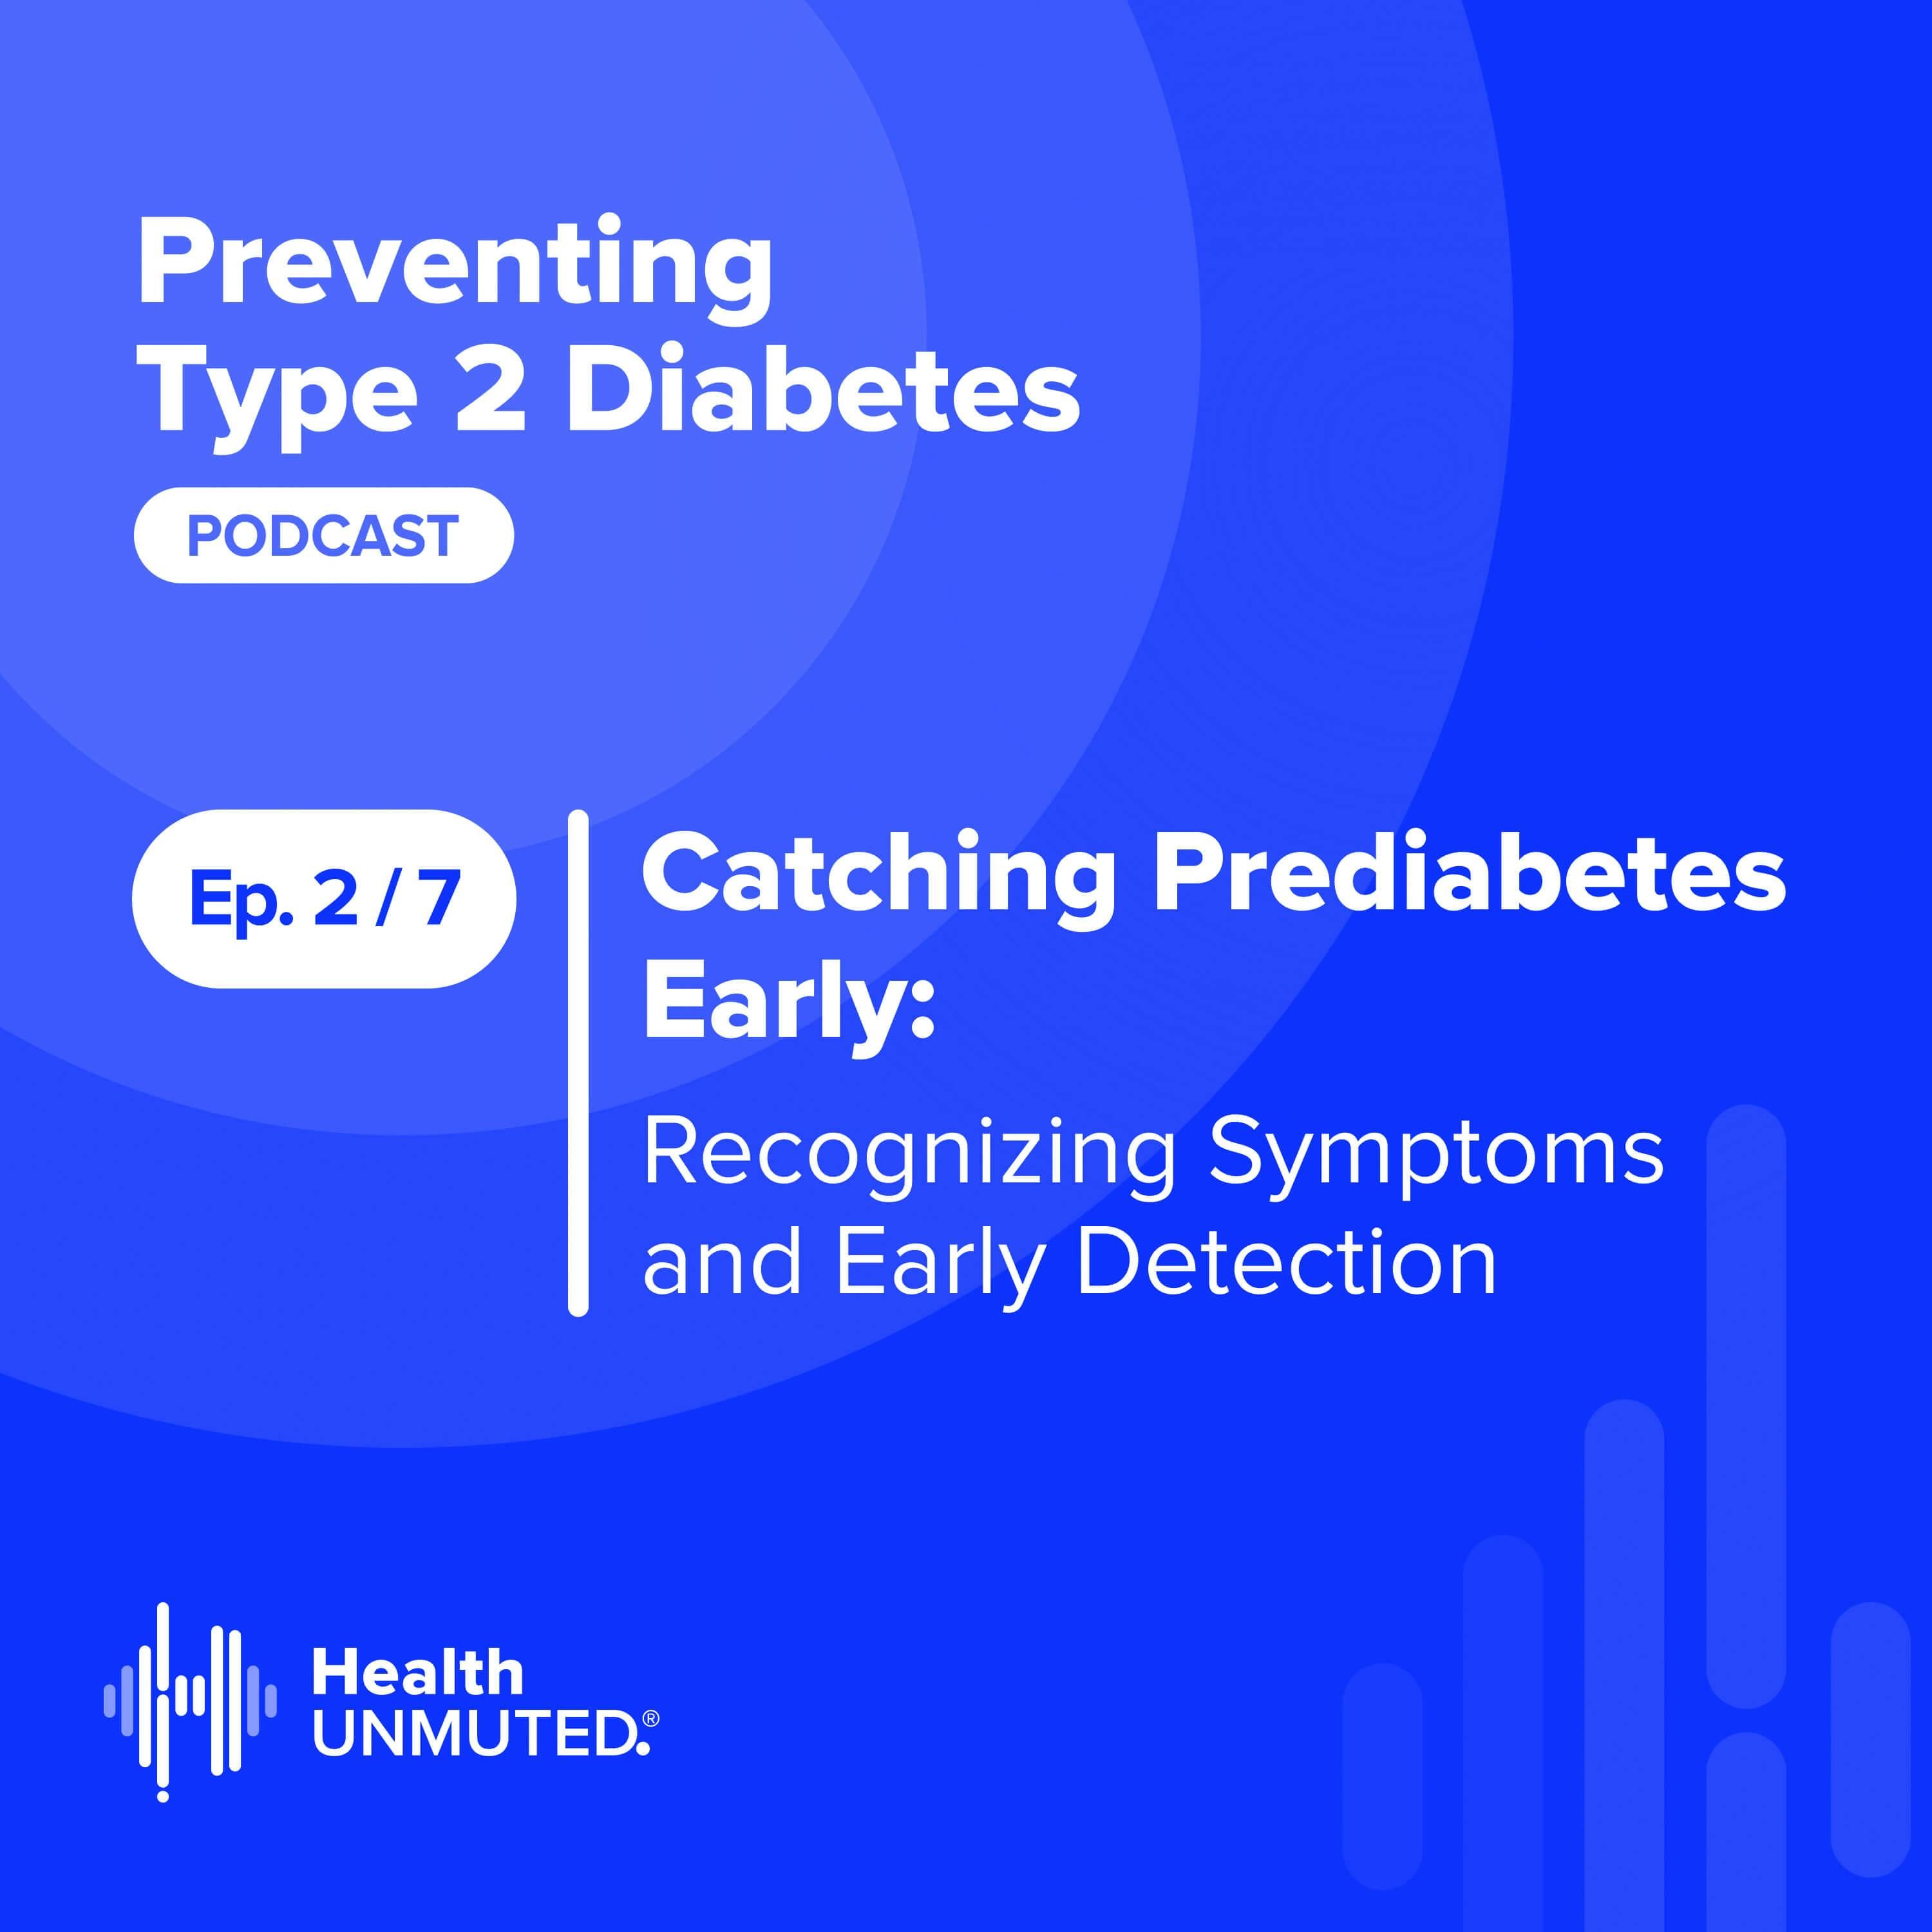 Ep 2: Catching Prediabetes Early: Recognizing Symptoms and Early Detection